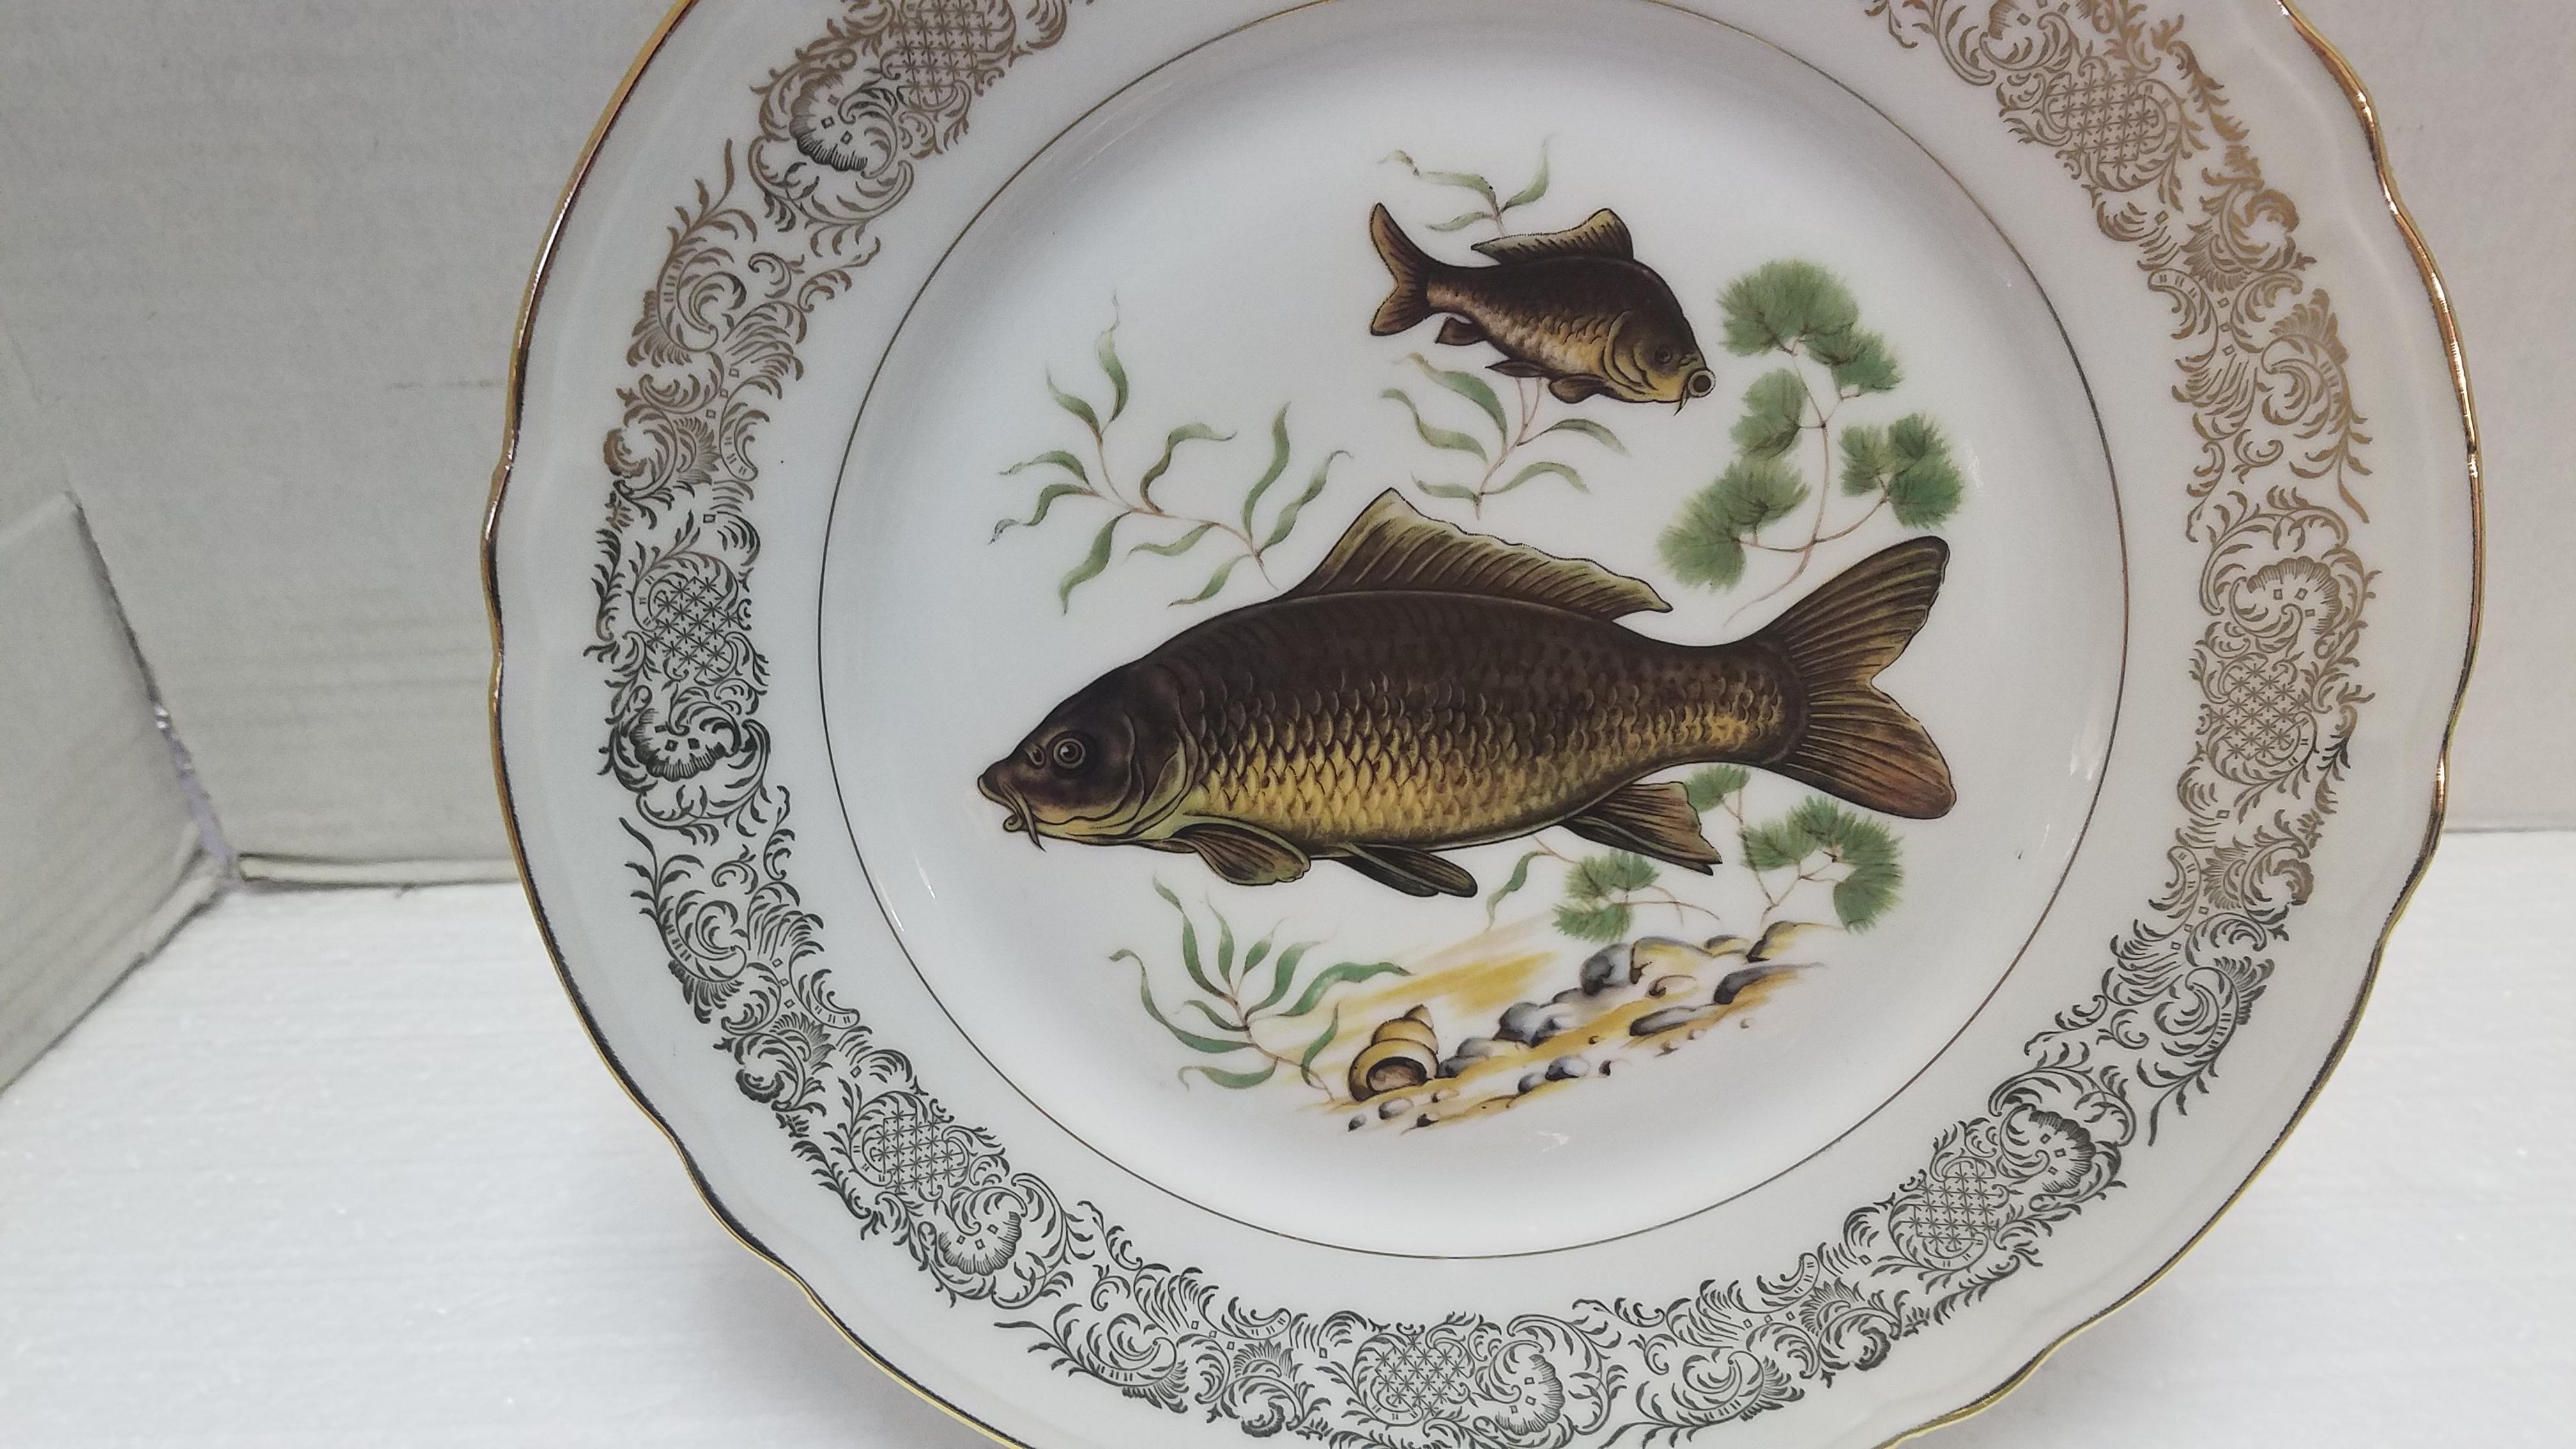 Set of 12 dinner plates and 1 gravy bowl. Vintage French Porcelain hand painted with 6 different fish (2 plates of each fish species). All beautifully accented with 24-carat gold. Please see all photos for details. Makers mark on the back 